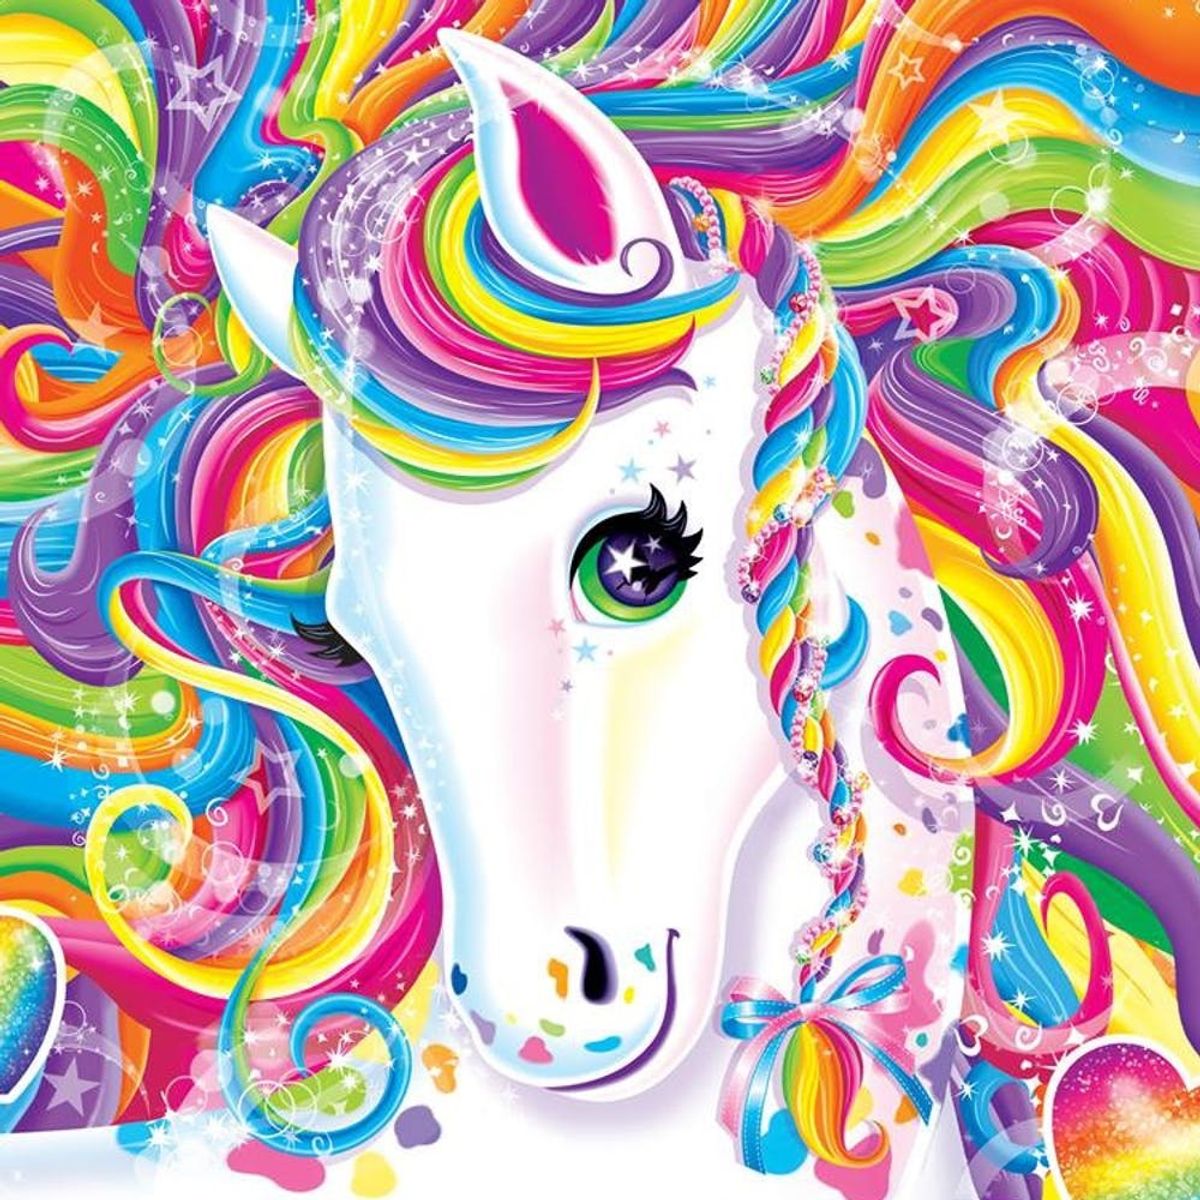 There’s Now a Lisa Frank Tarot Deck for Your Unicorn Rainbow Future-Telling Needs